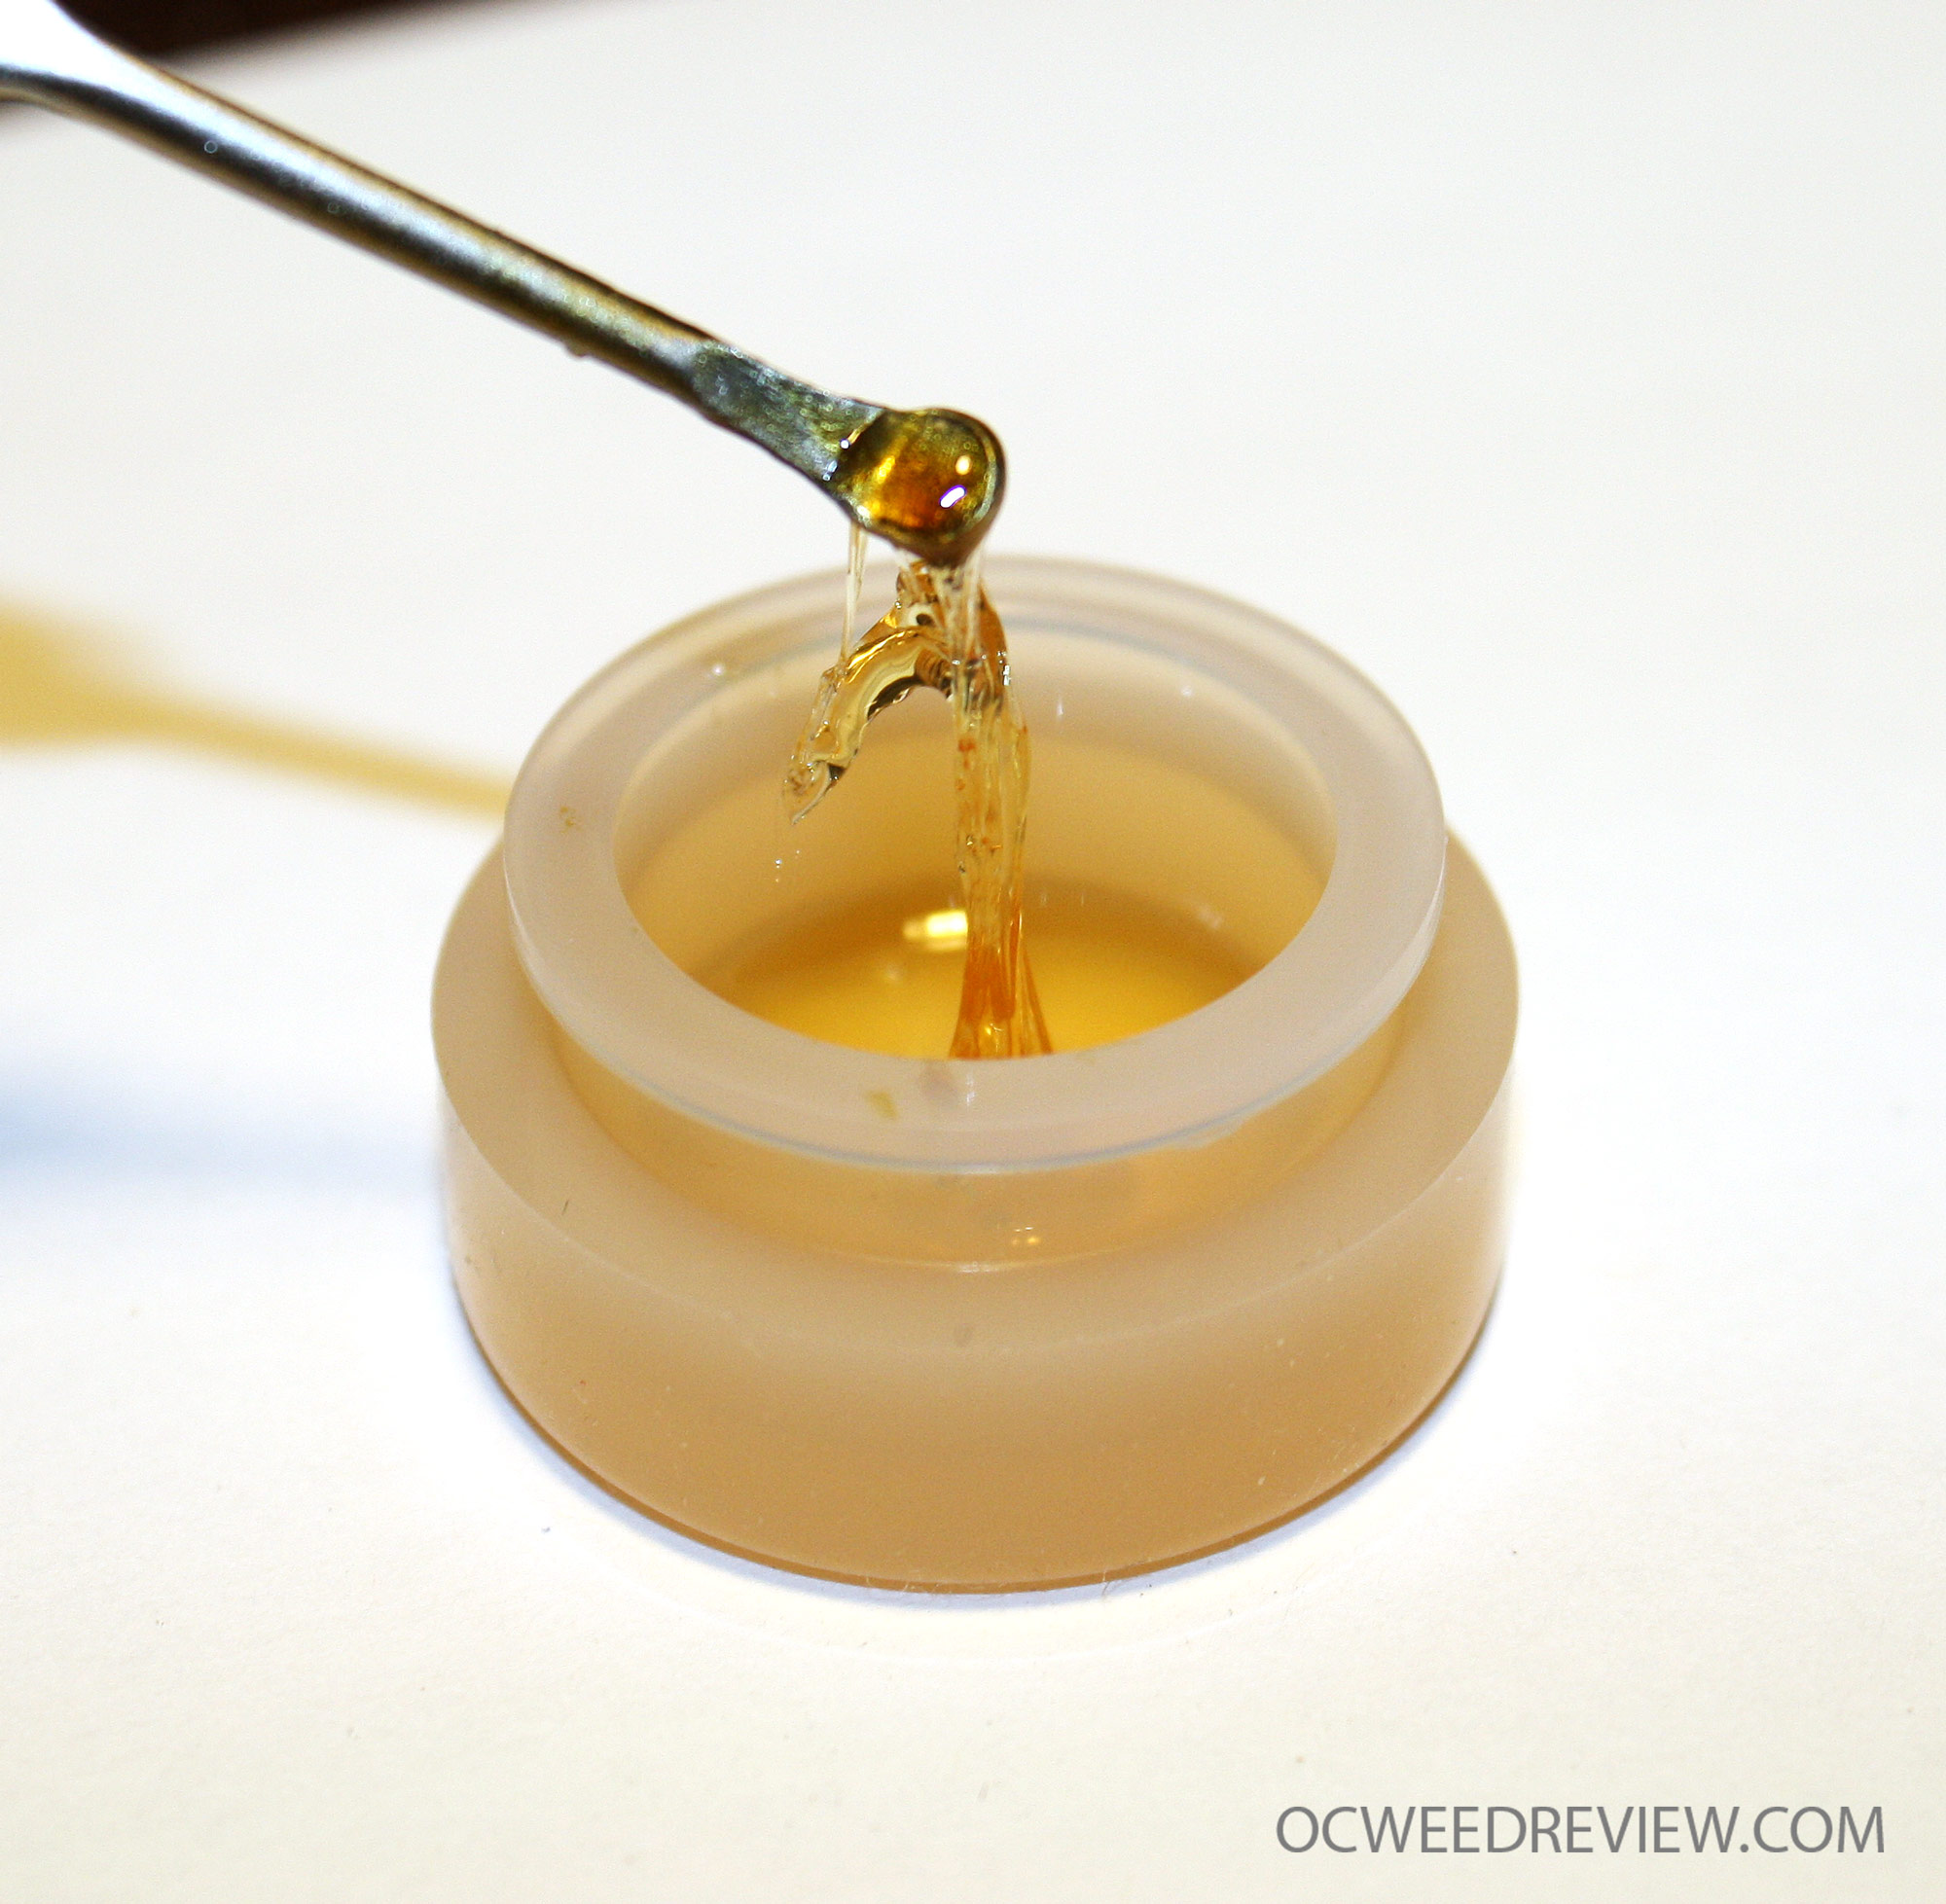 Pineapple Cheesecake Sap from S.A.P.A. Concentrate Review